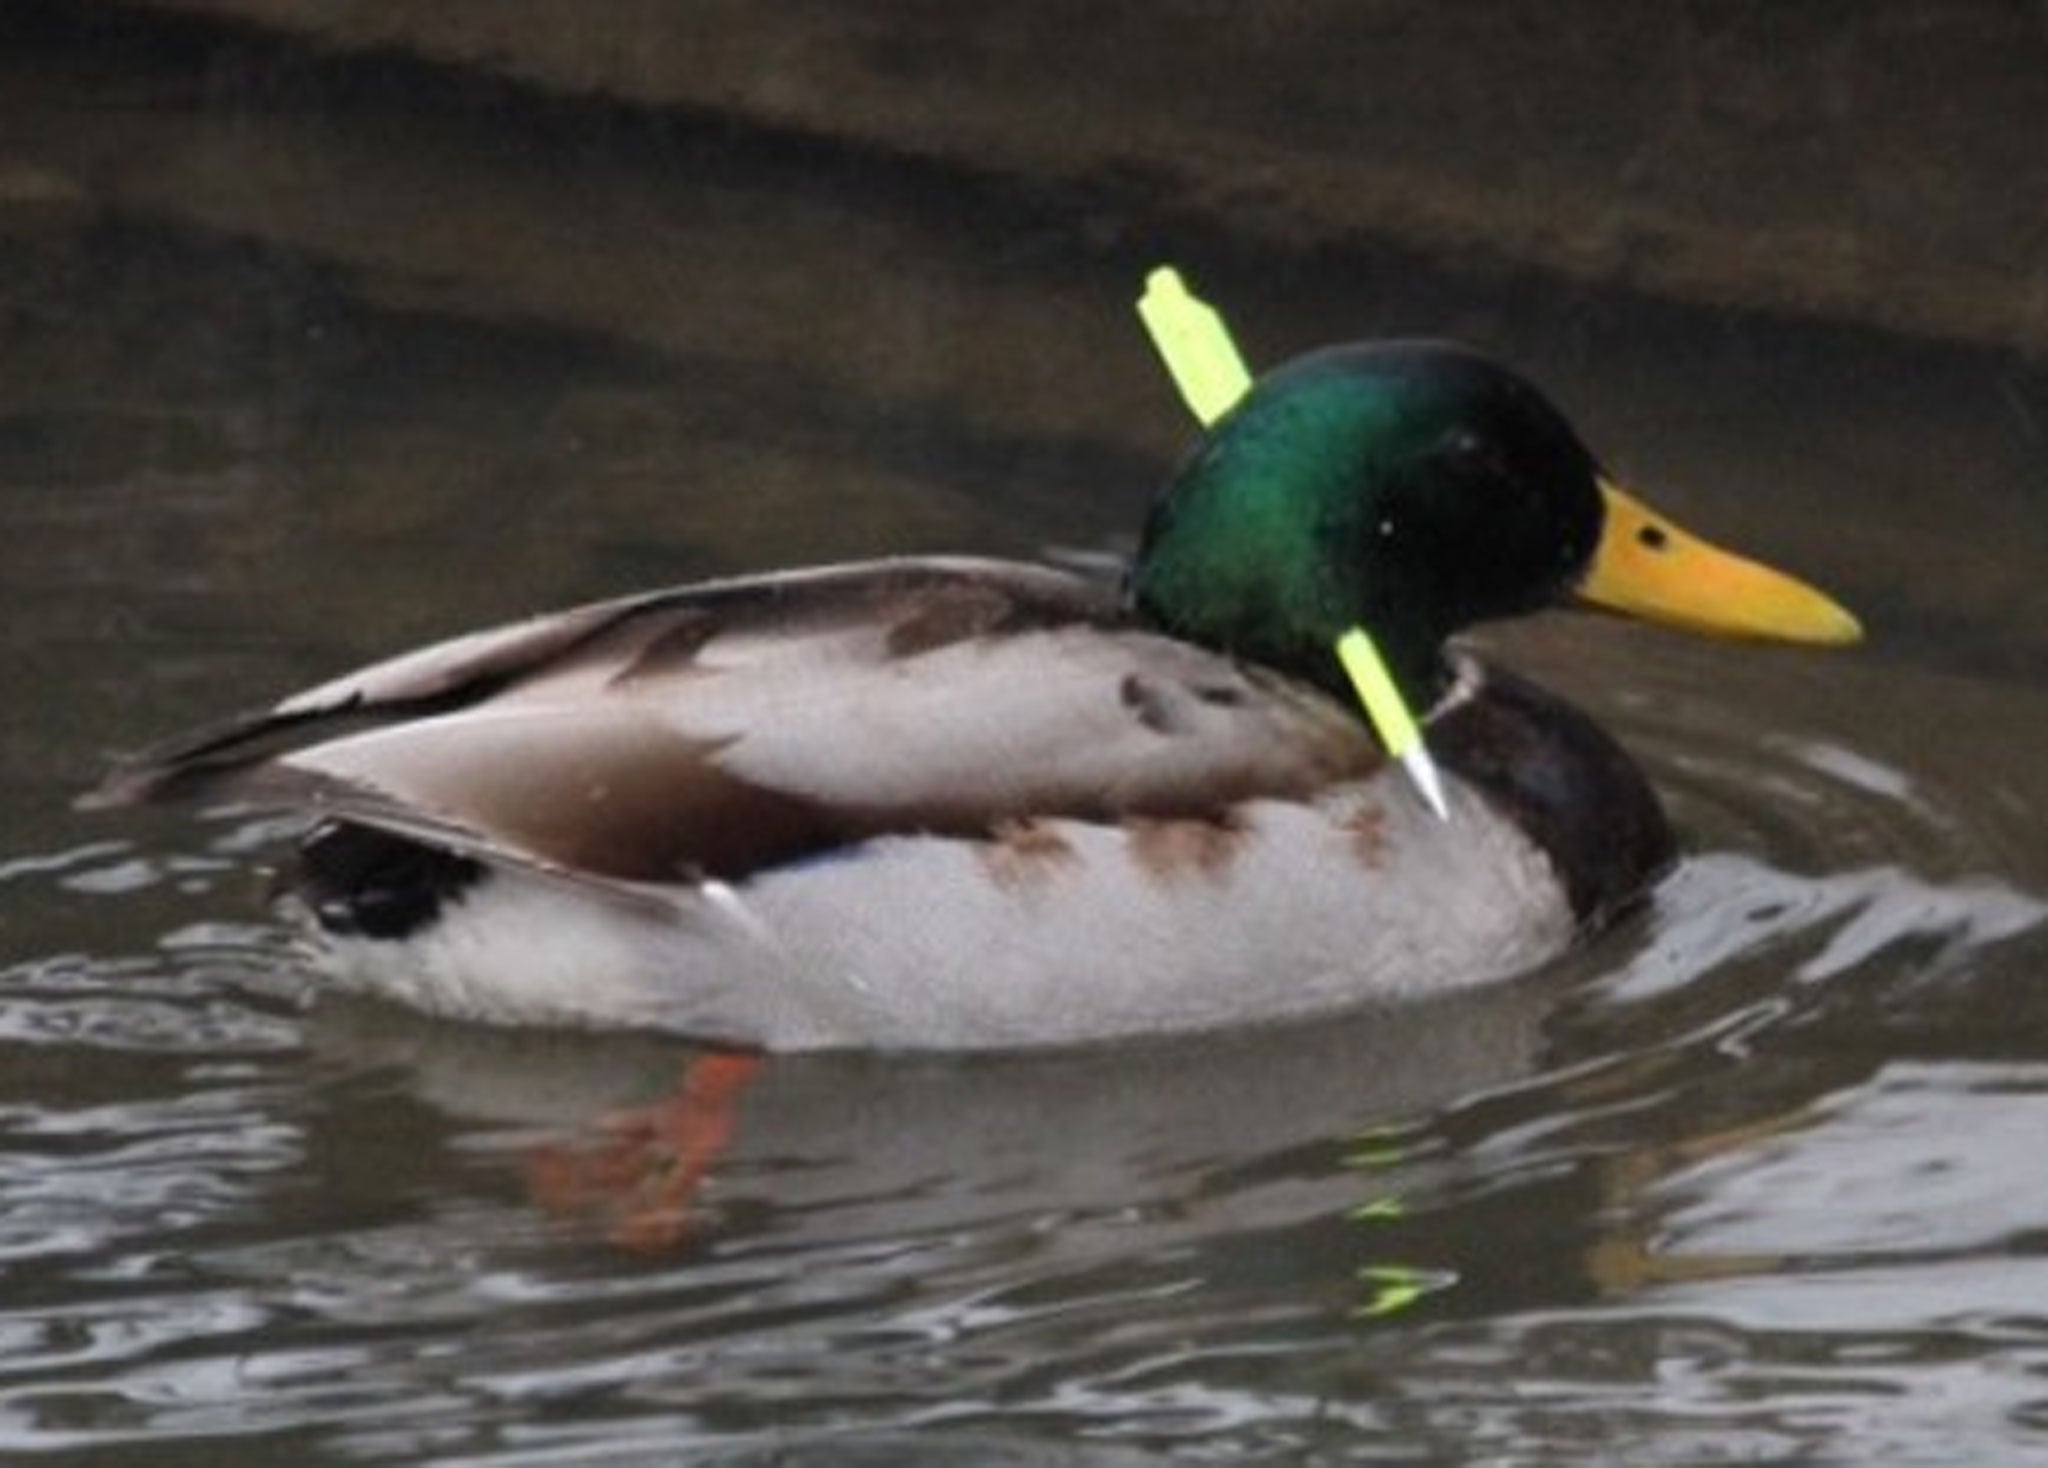 The mallard duck was spotted with the bolt through its head in the Dearne Valley County Park in Barnsley